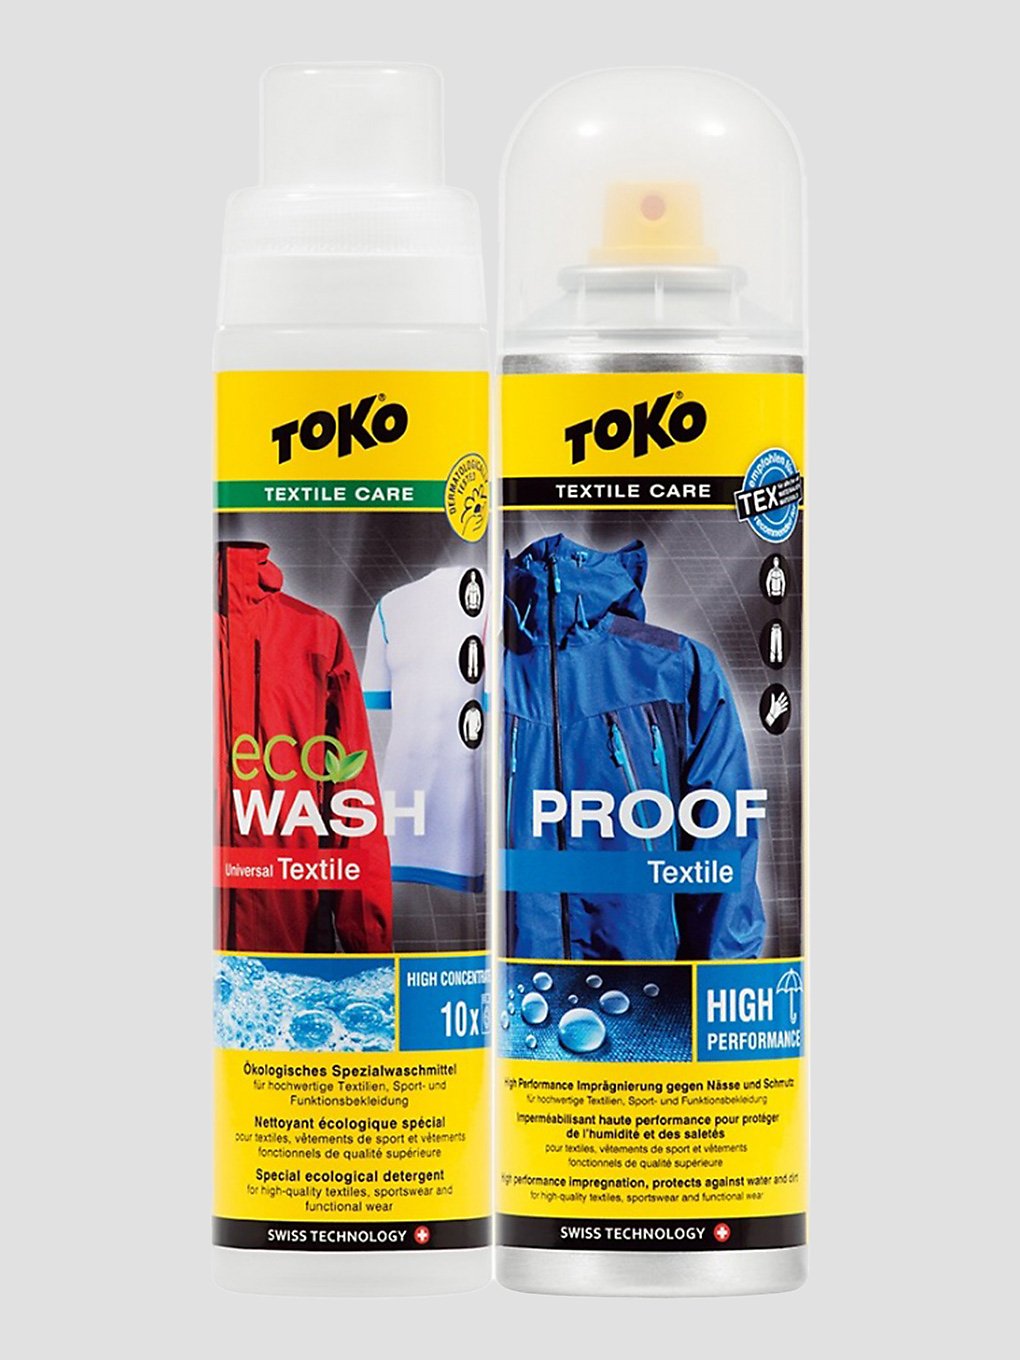 Toko Duo-Pack Textile Proof&Eco Textile Wash patroon